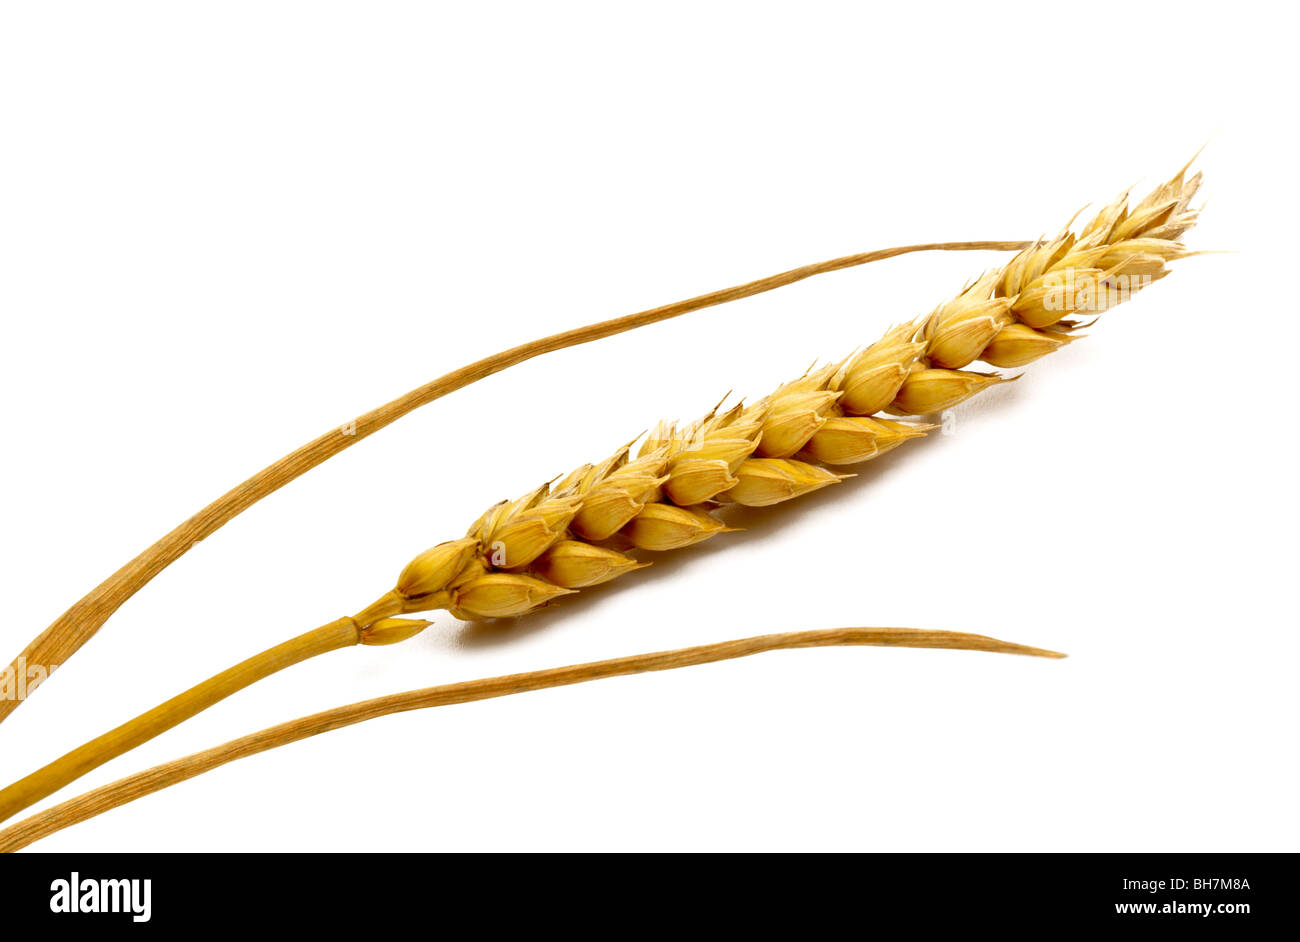 Ear of wheat on the white background with shadow Stock Photo